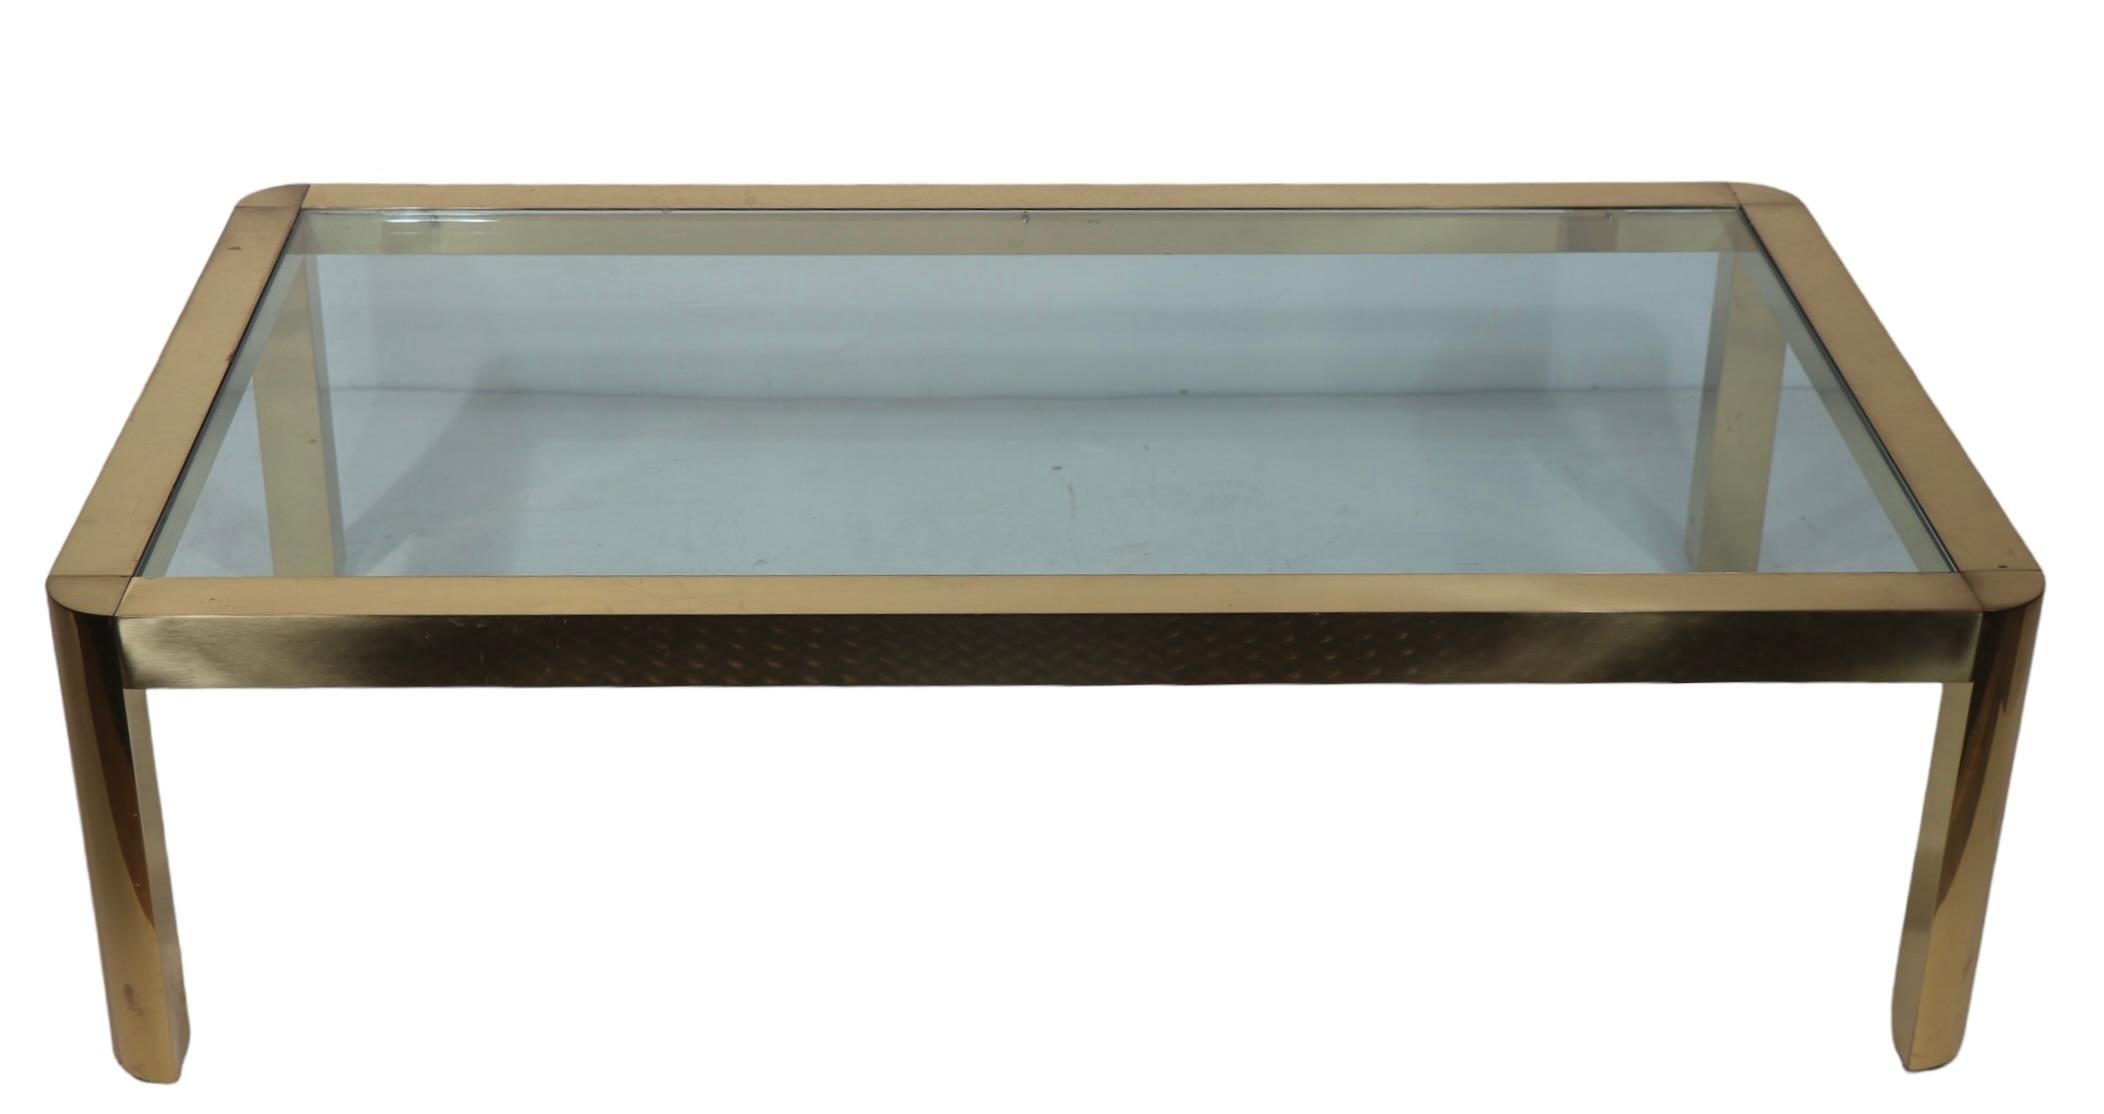 Italian Postmodern Hollywood Regency Brass and Glass Coffee Table Made in Italy c 1970's For Sale